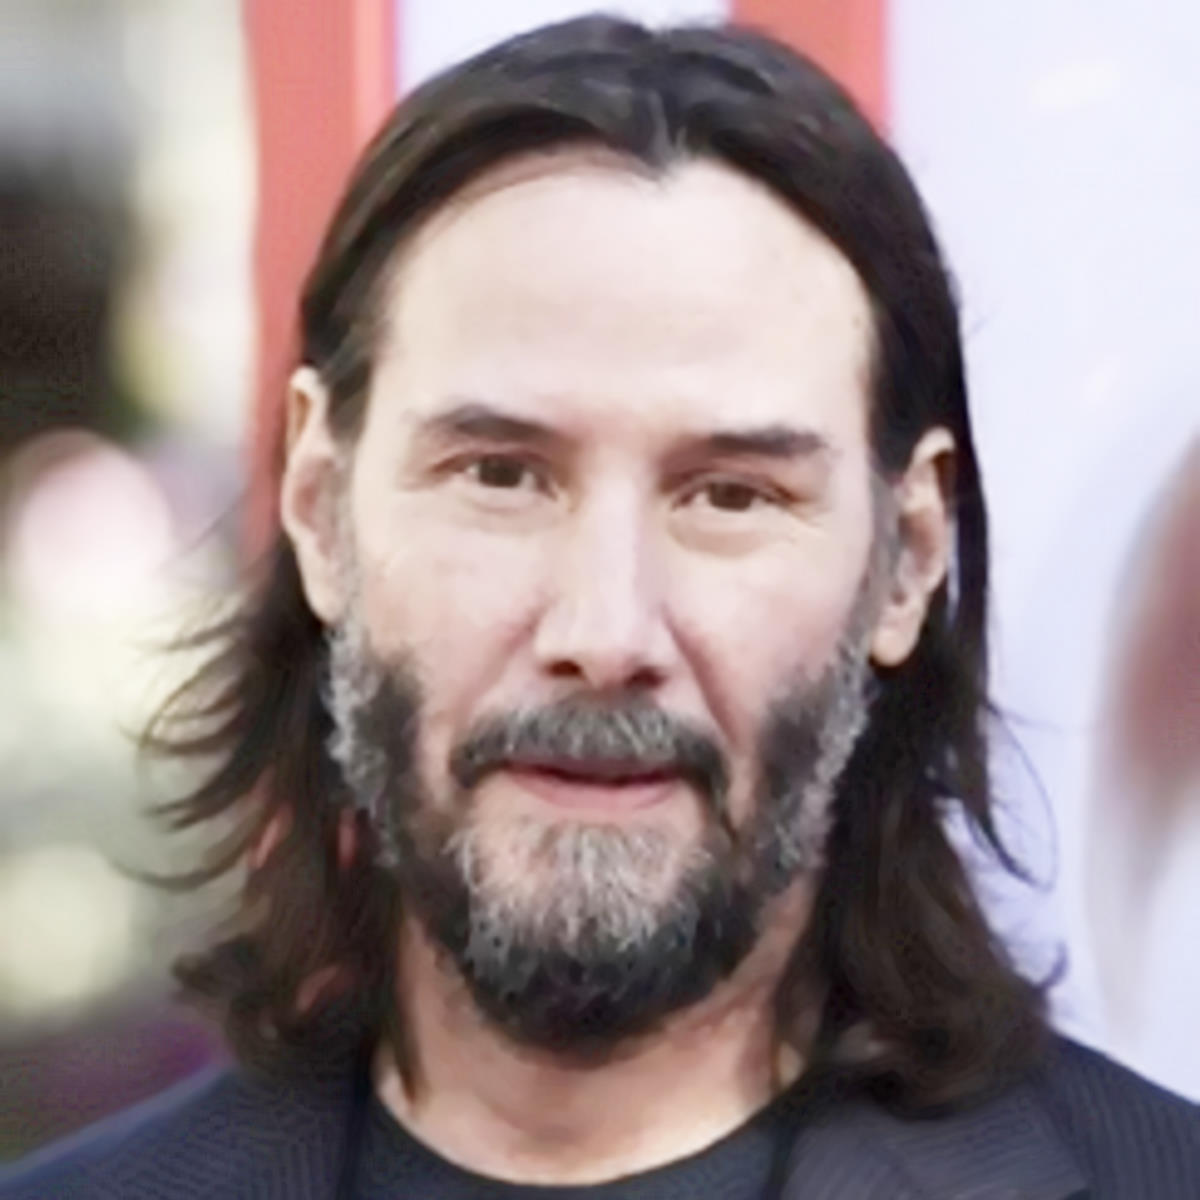 Buon compleanno Keanu Reeves